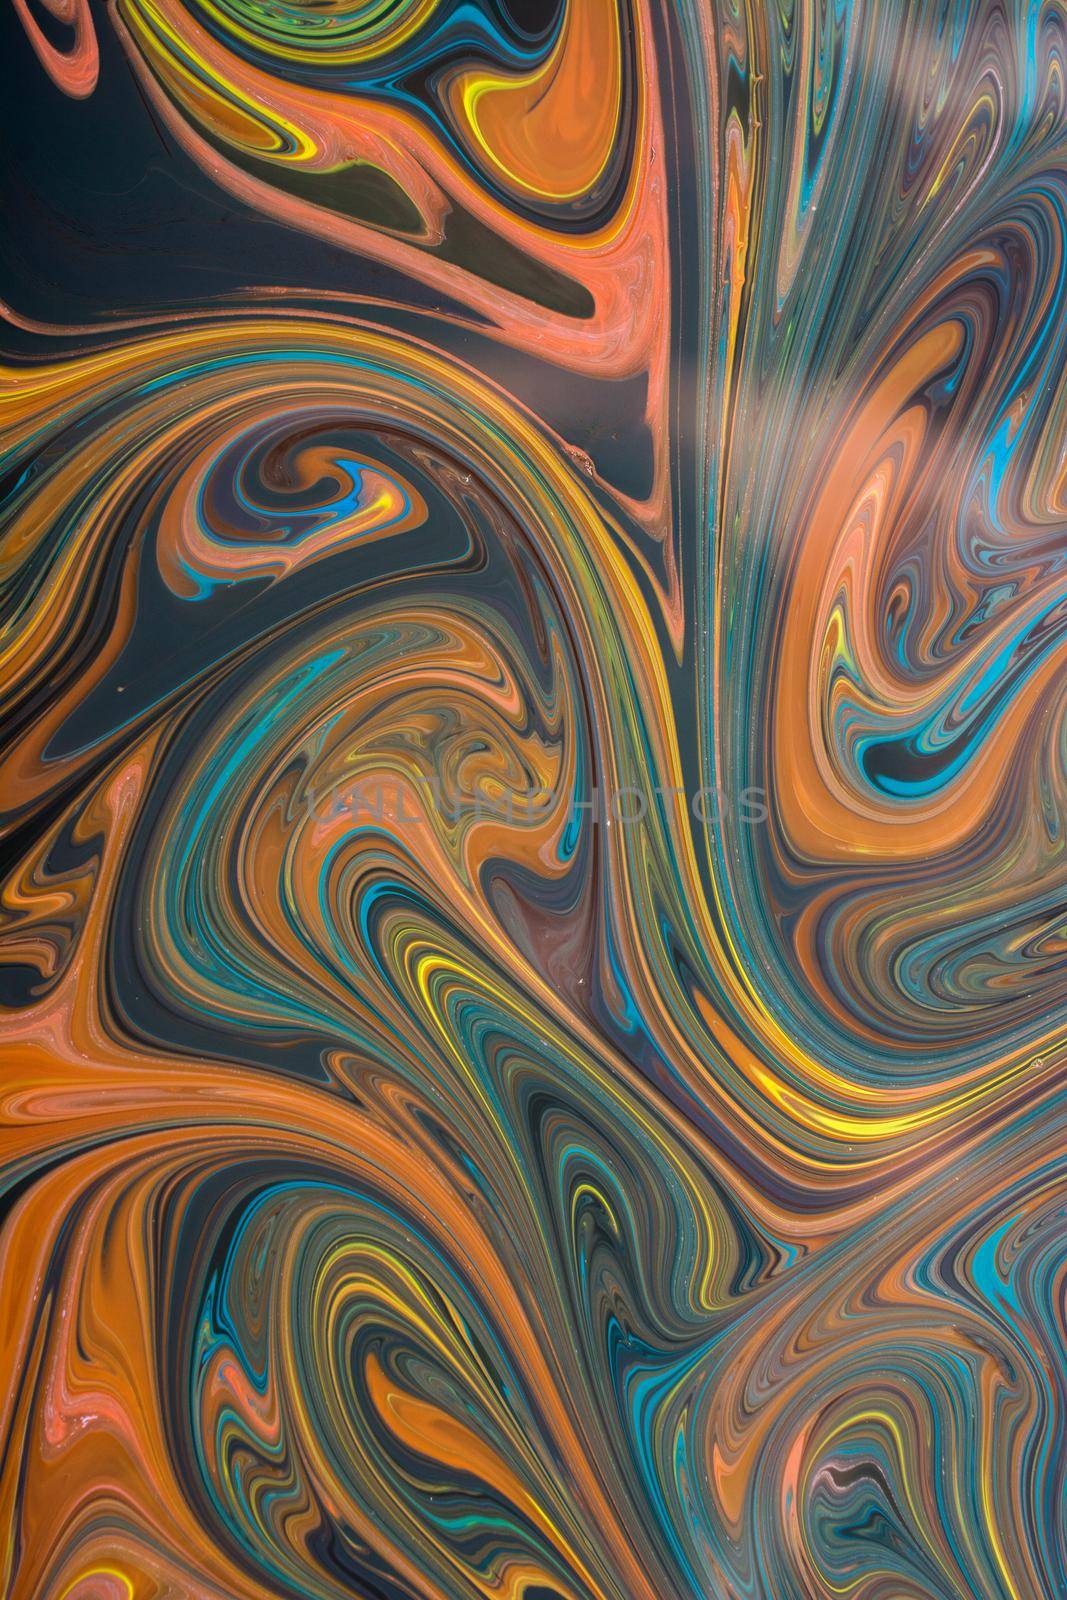 Abstract marbling art patterns as colorful background by berkay